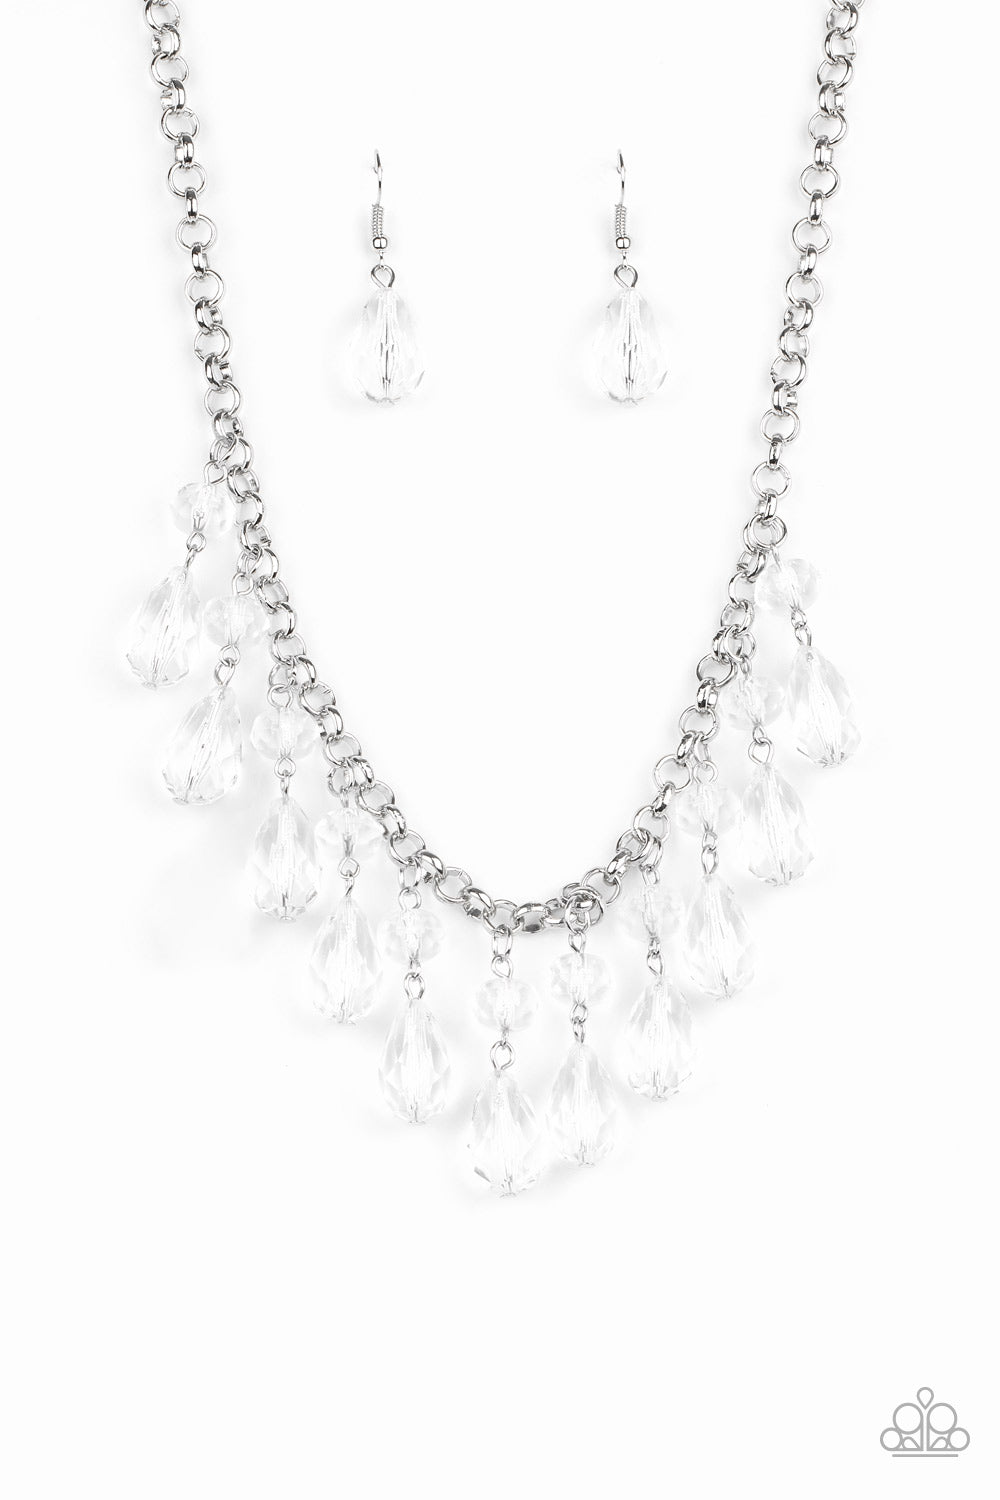 Crystal Enchantment White Necklace - Paparazzi Accessories  Featuring round and teardrop cuts, white crystal-like tassels dangle from the bottom of a shimmery silver chain, creating an enchanting fringe below the collar. Features an adjustable clasp closure. All Paparazzi Accessories are lead free and nickel free!  Sold as one individual necklace. Includes one pair of matching earrings.